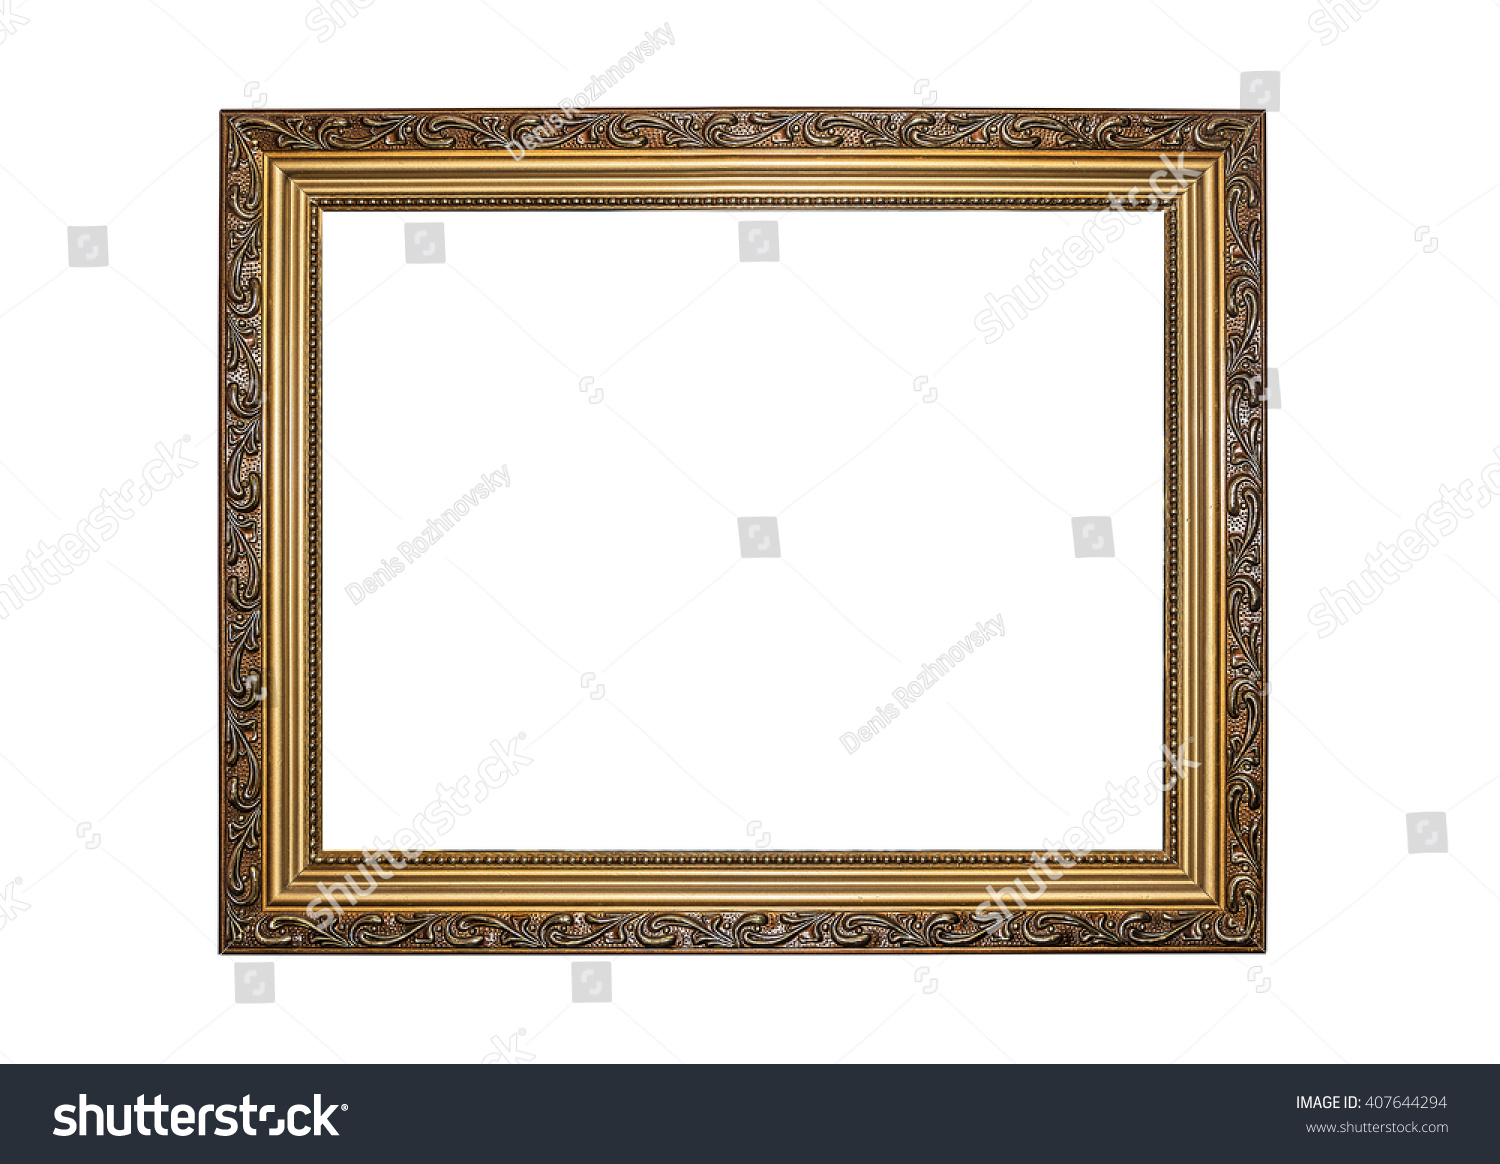 Gold color picture frame isolated on white. #407644294